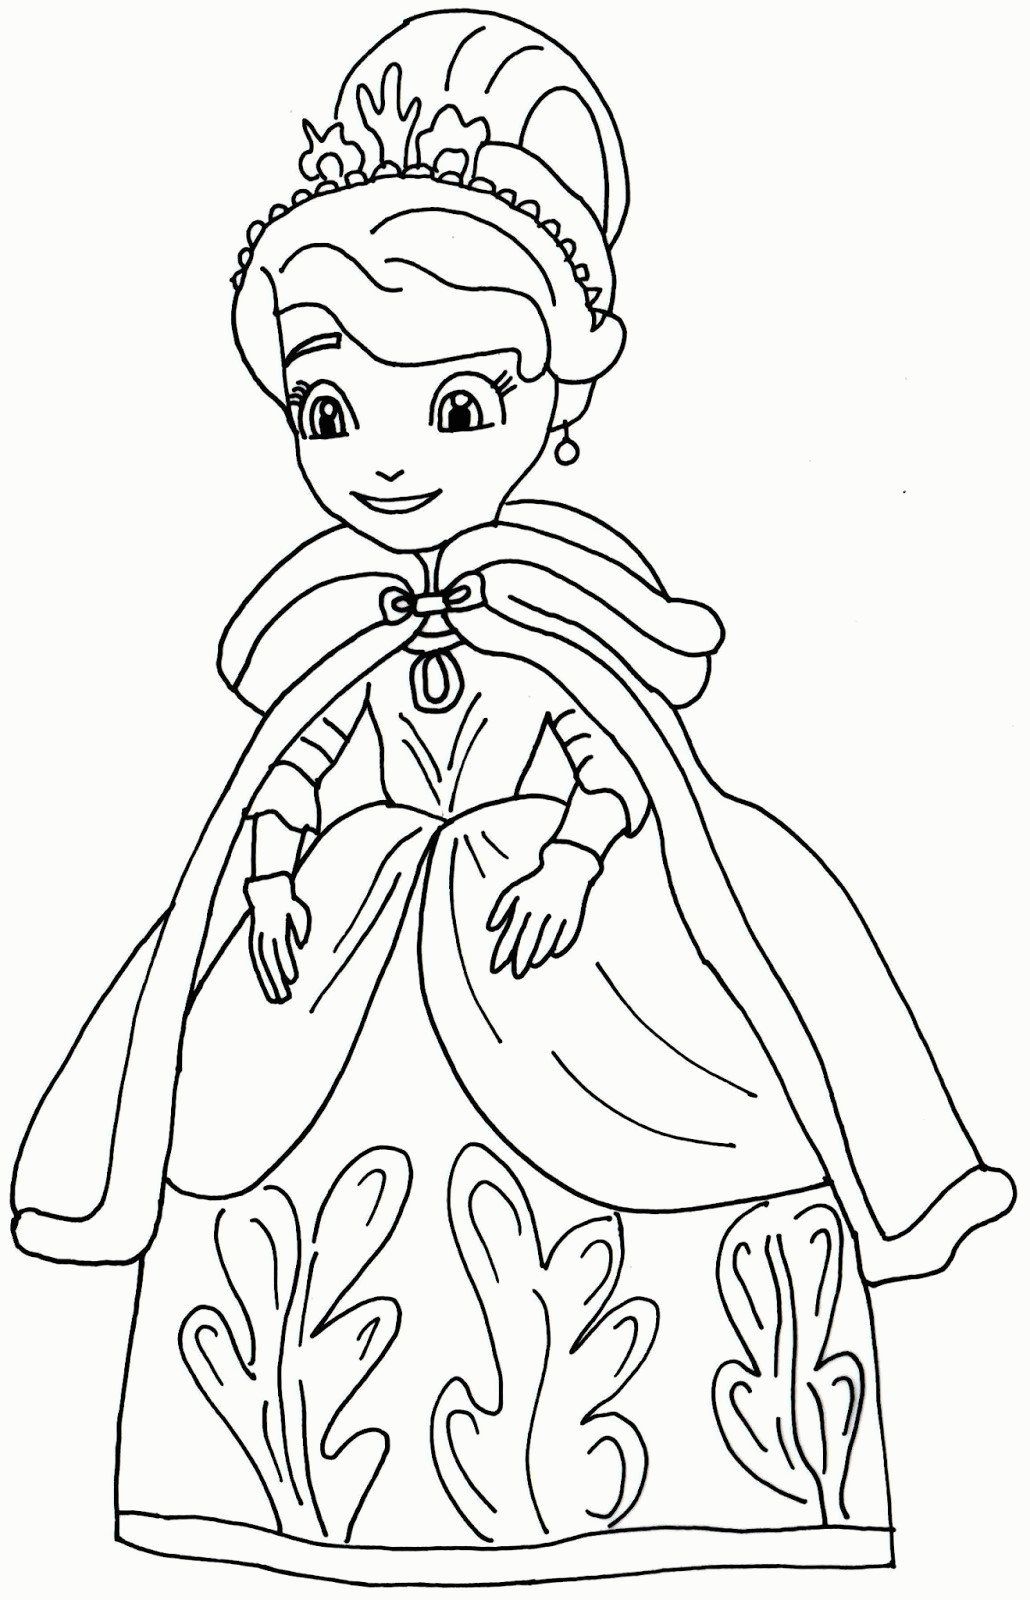 Sofia The First Coloring Pages
 Sofia the First Coloring Pages Best Coloring Pages For Kids